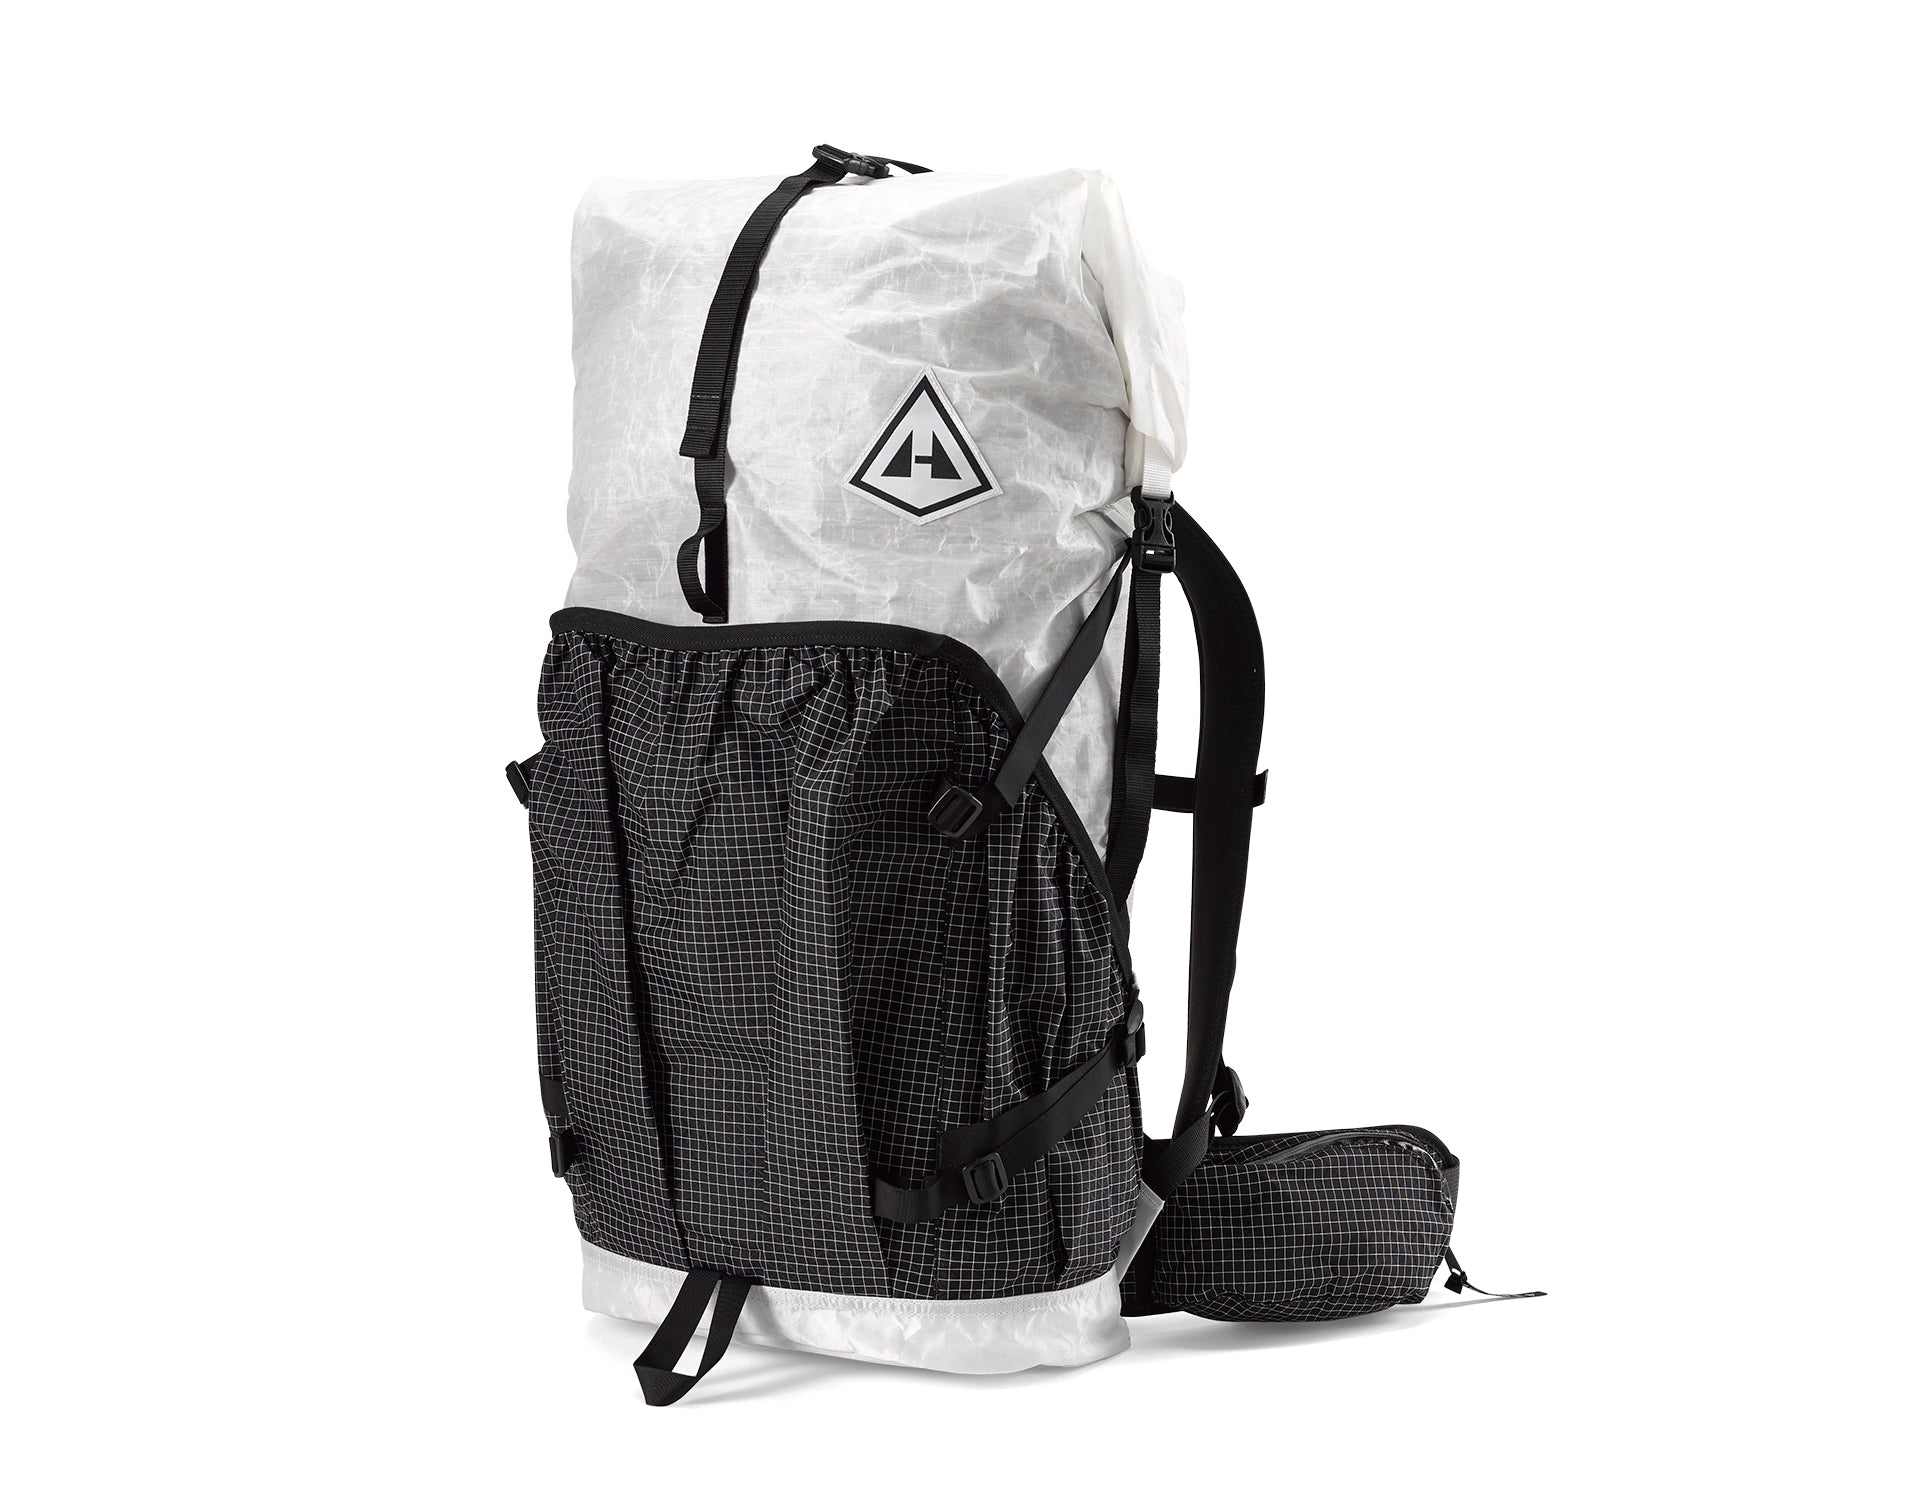 A white backpack with a black strap.